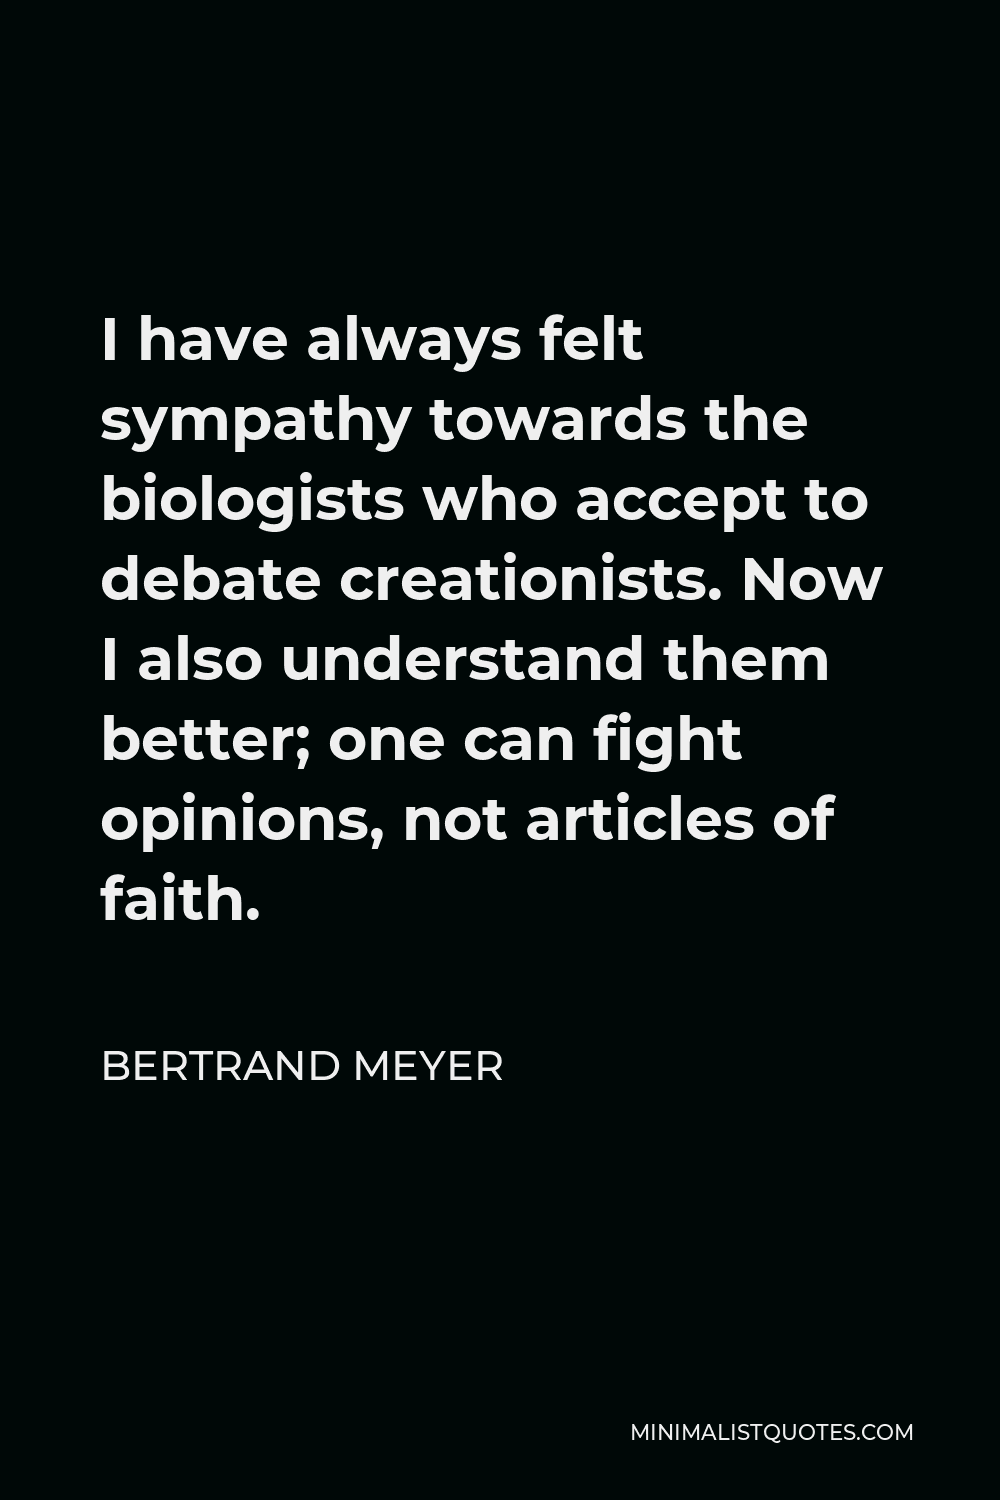 Bertrand Meyer Quote - I have always felt sympathy towards the biologists who accept to debate creationists. Now I also understand them better; one can fight opinions, not articles of faith.